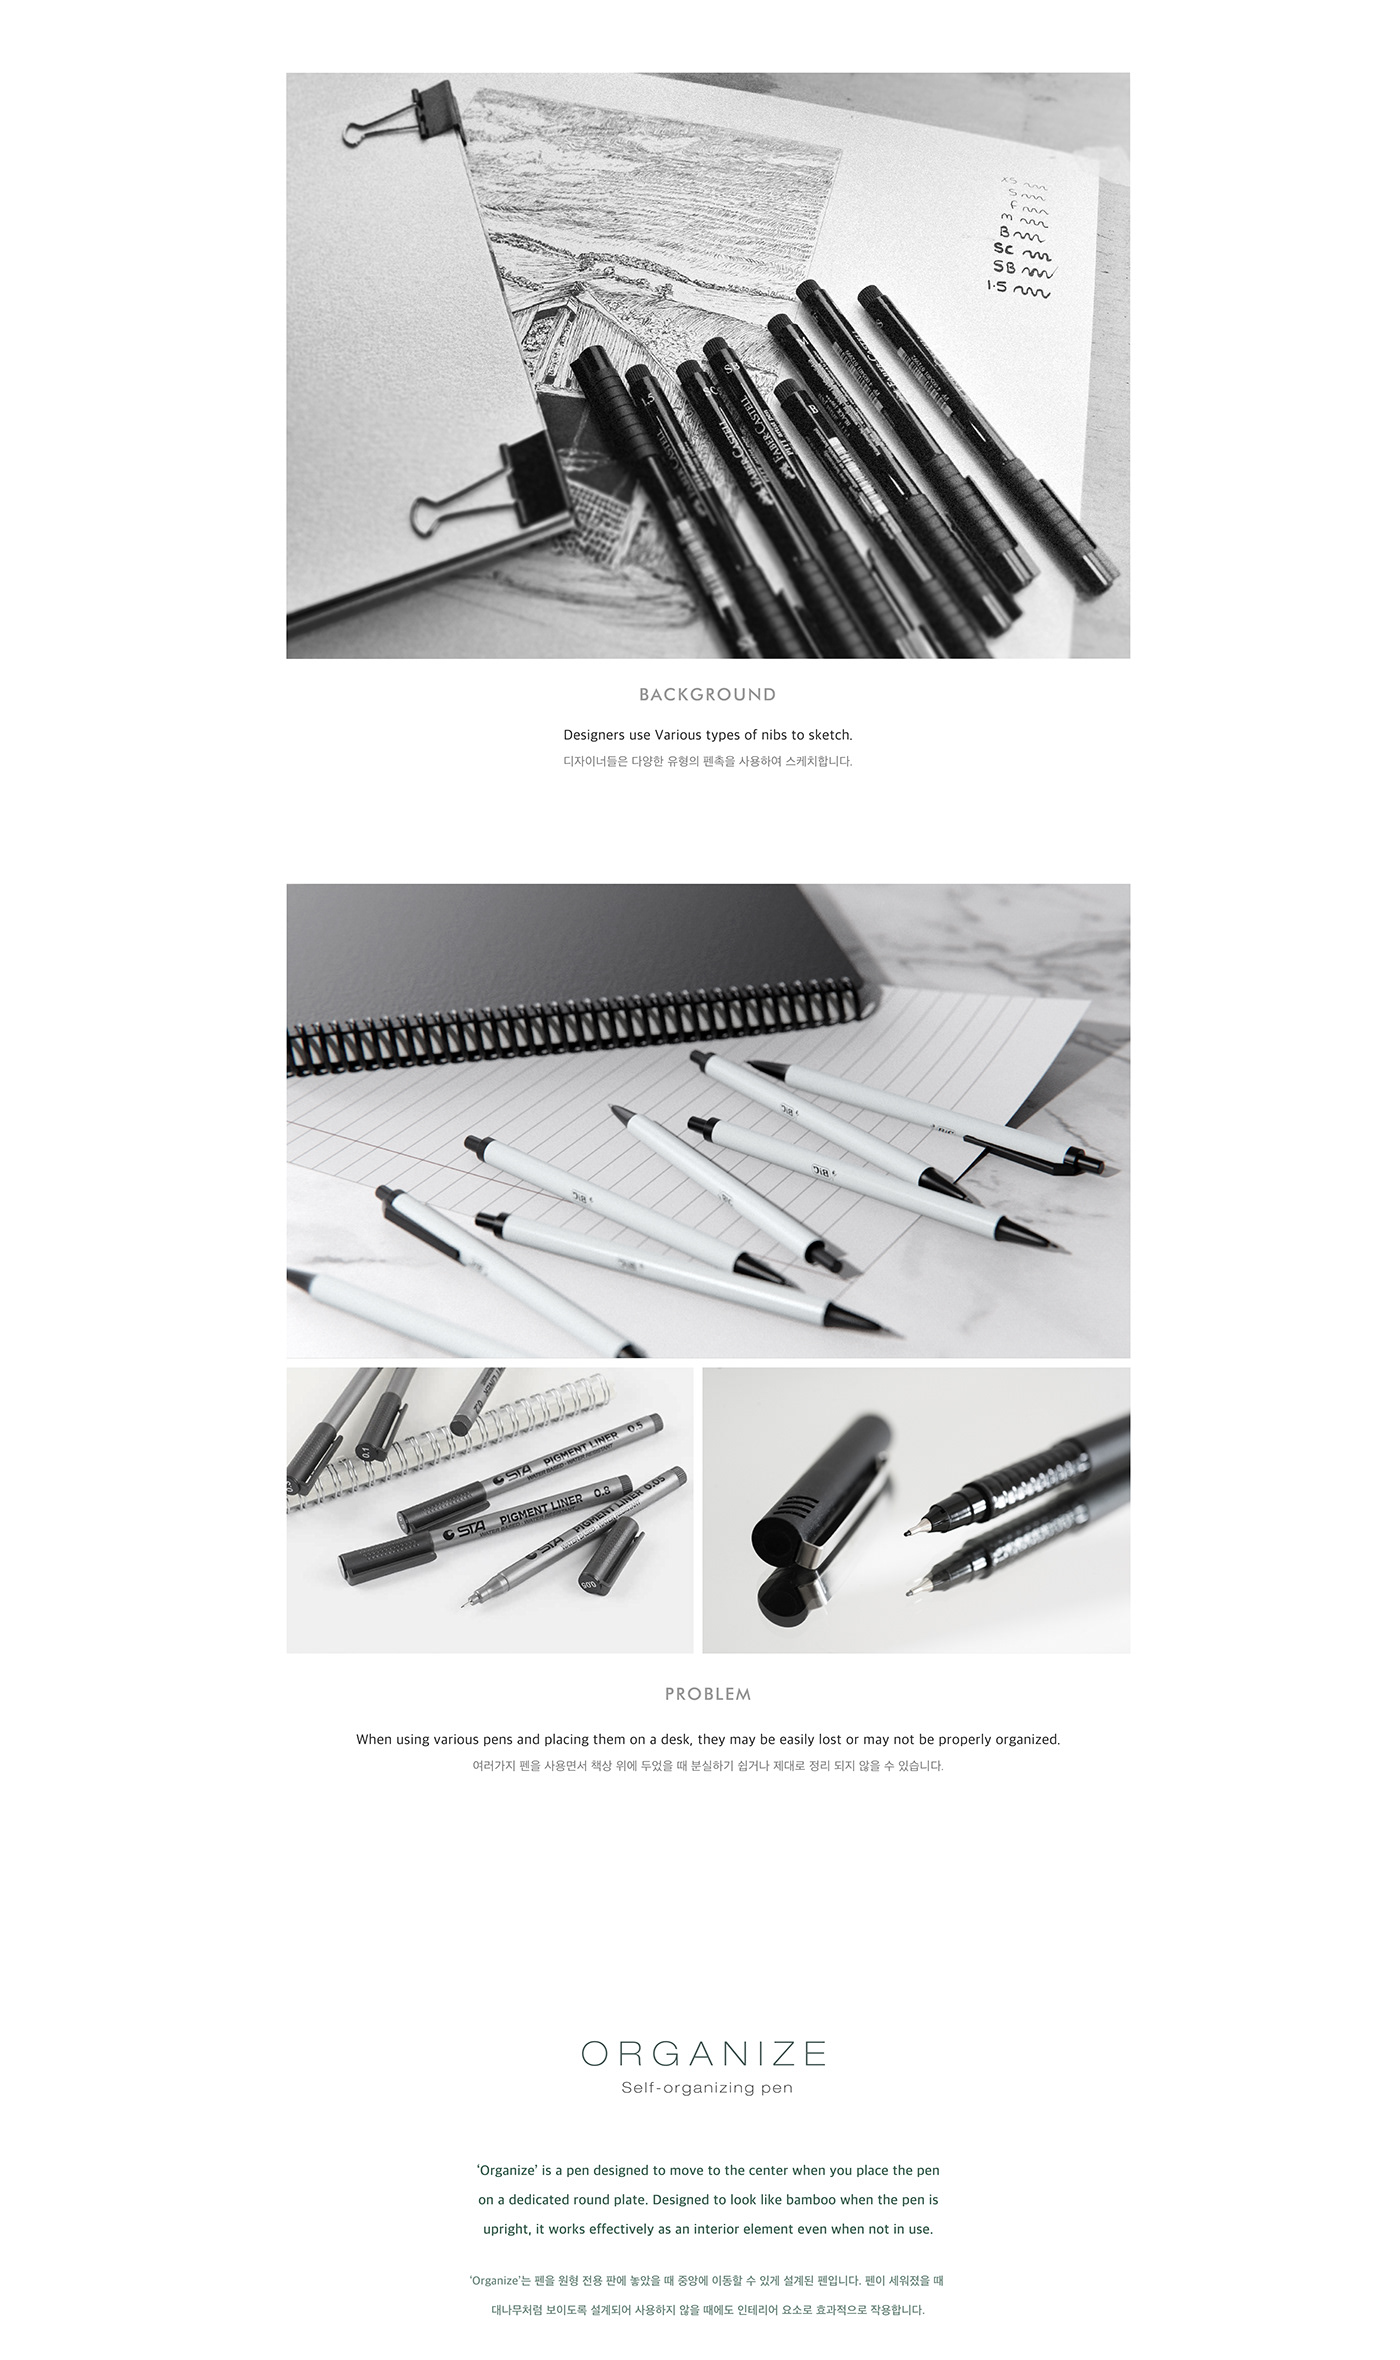 bamboo design desk industrial Nature Office pen product Rolypolytoy visualization